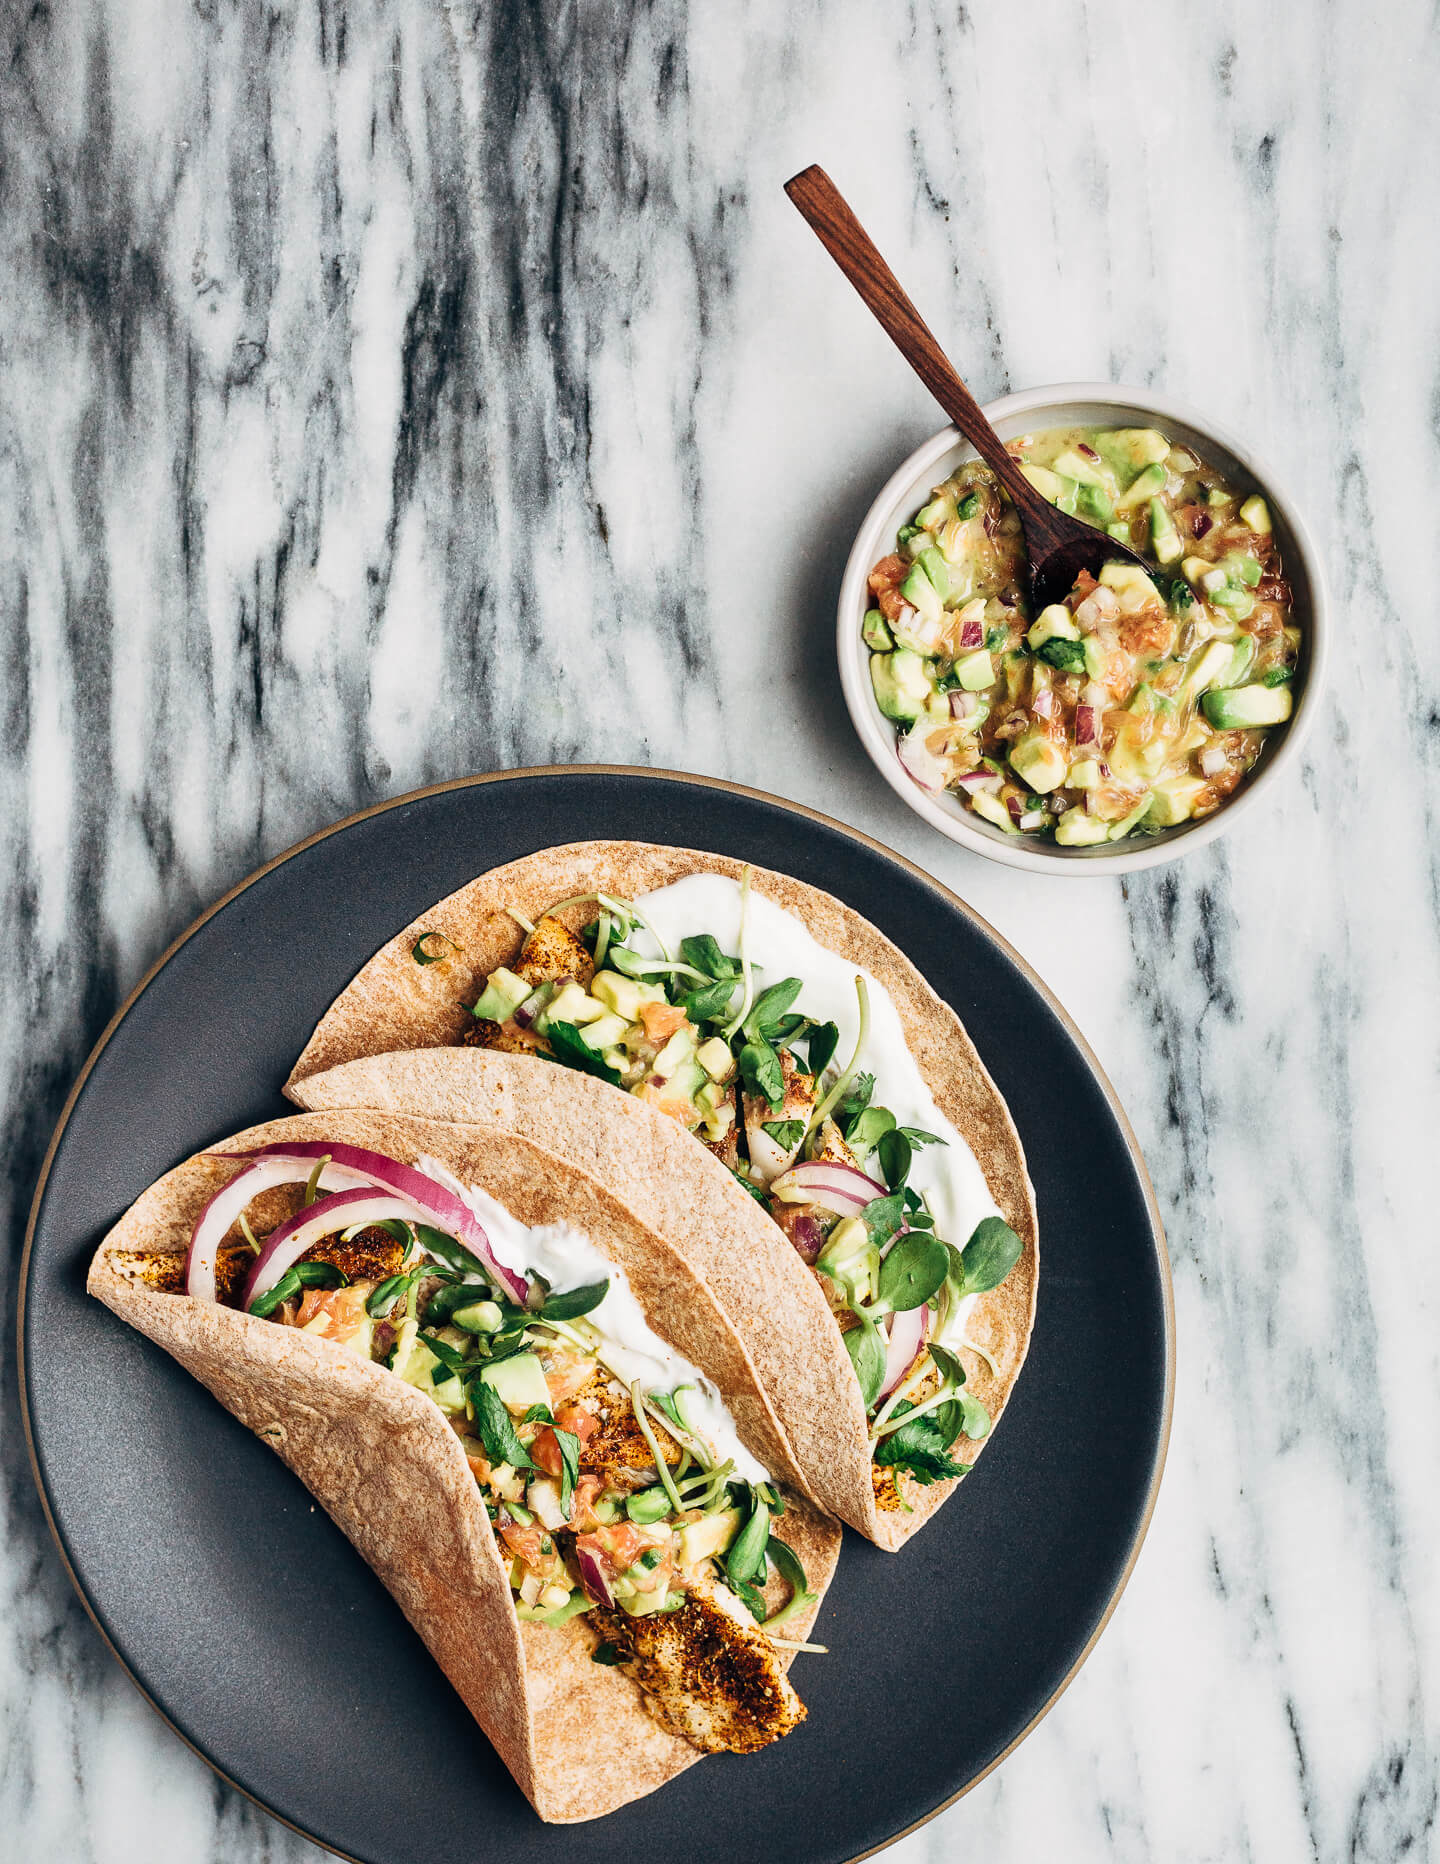 Simple broiled tilapia tacos that come together quickly under the broiler, making them perfect for weeknight meals. The tacos are topped with a tangly grapefruit-avocado salsa that contrasts beautifully with the spicy fish. 